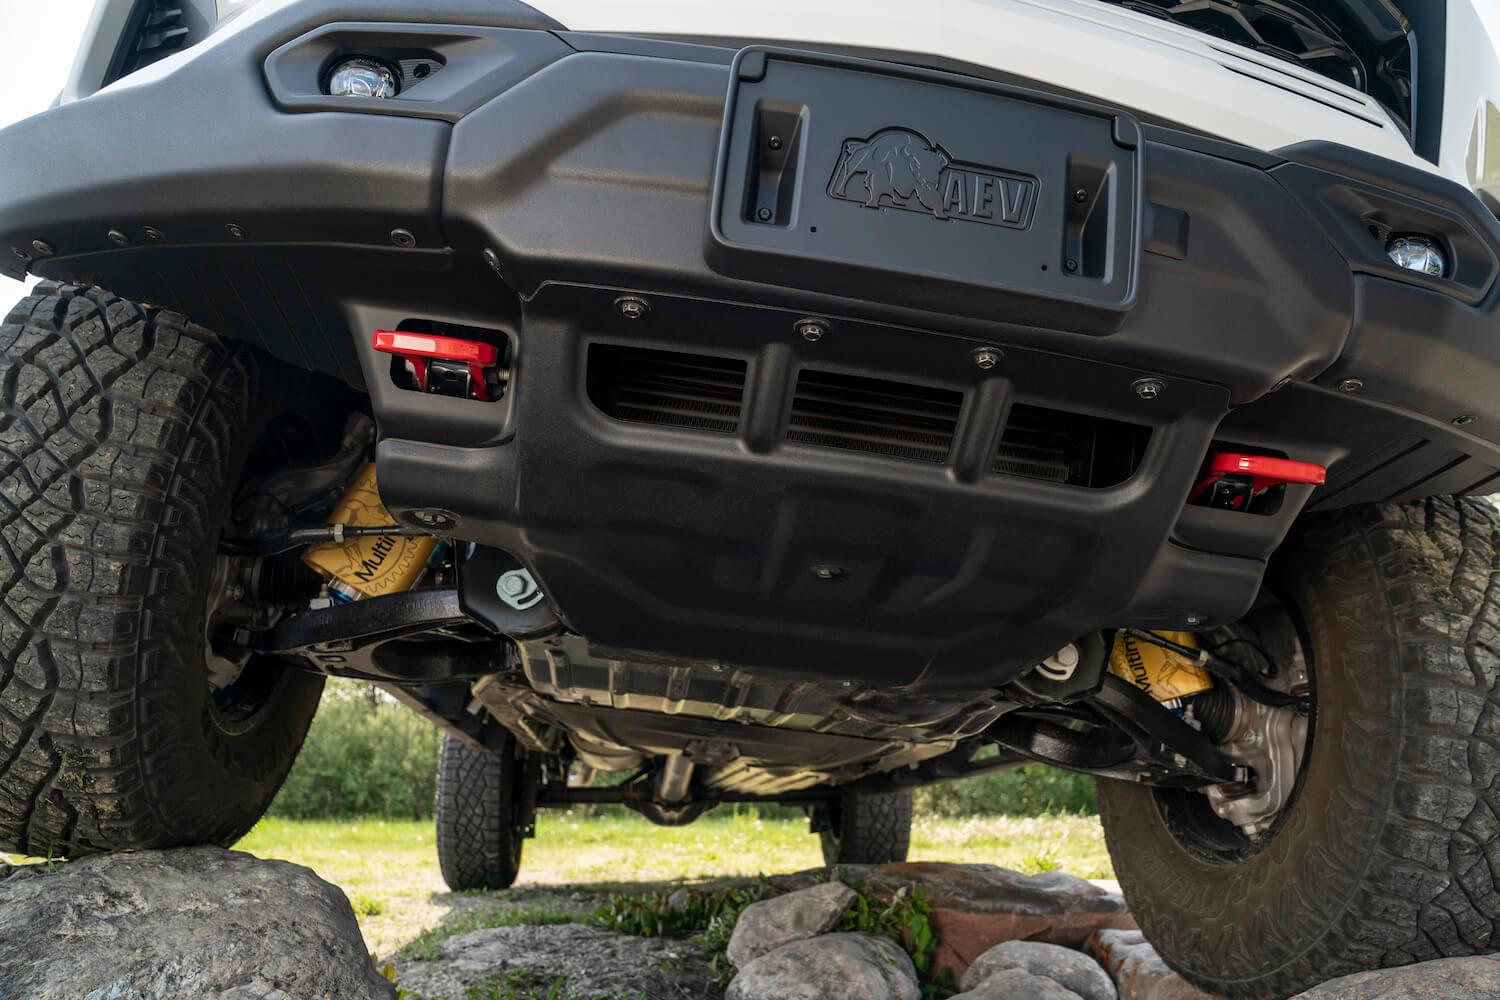 The skidplates and underside of a Chevrolet Colorado ZR2 pickup truck.